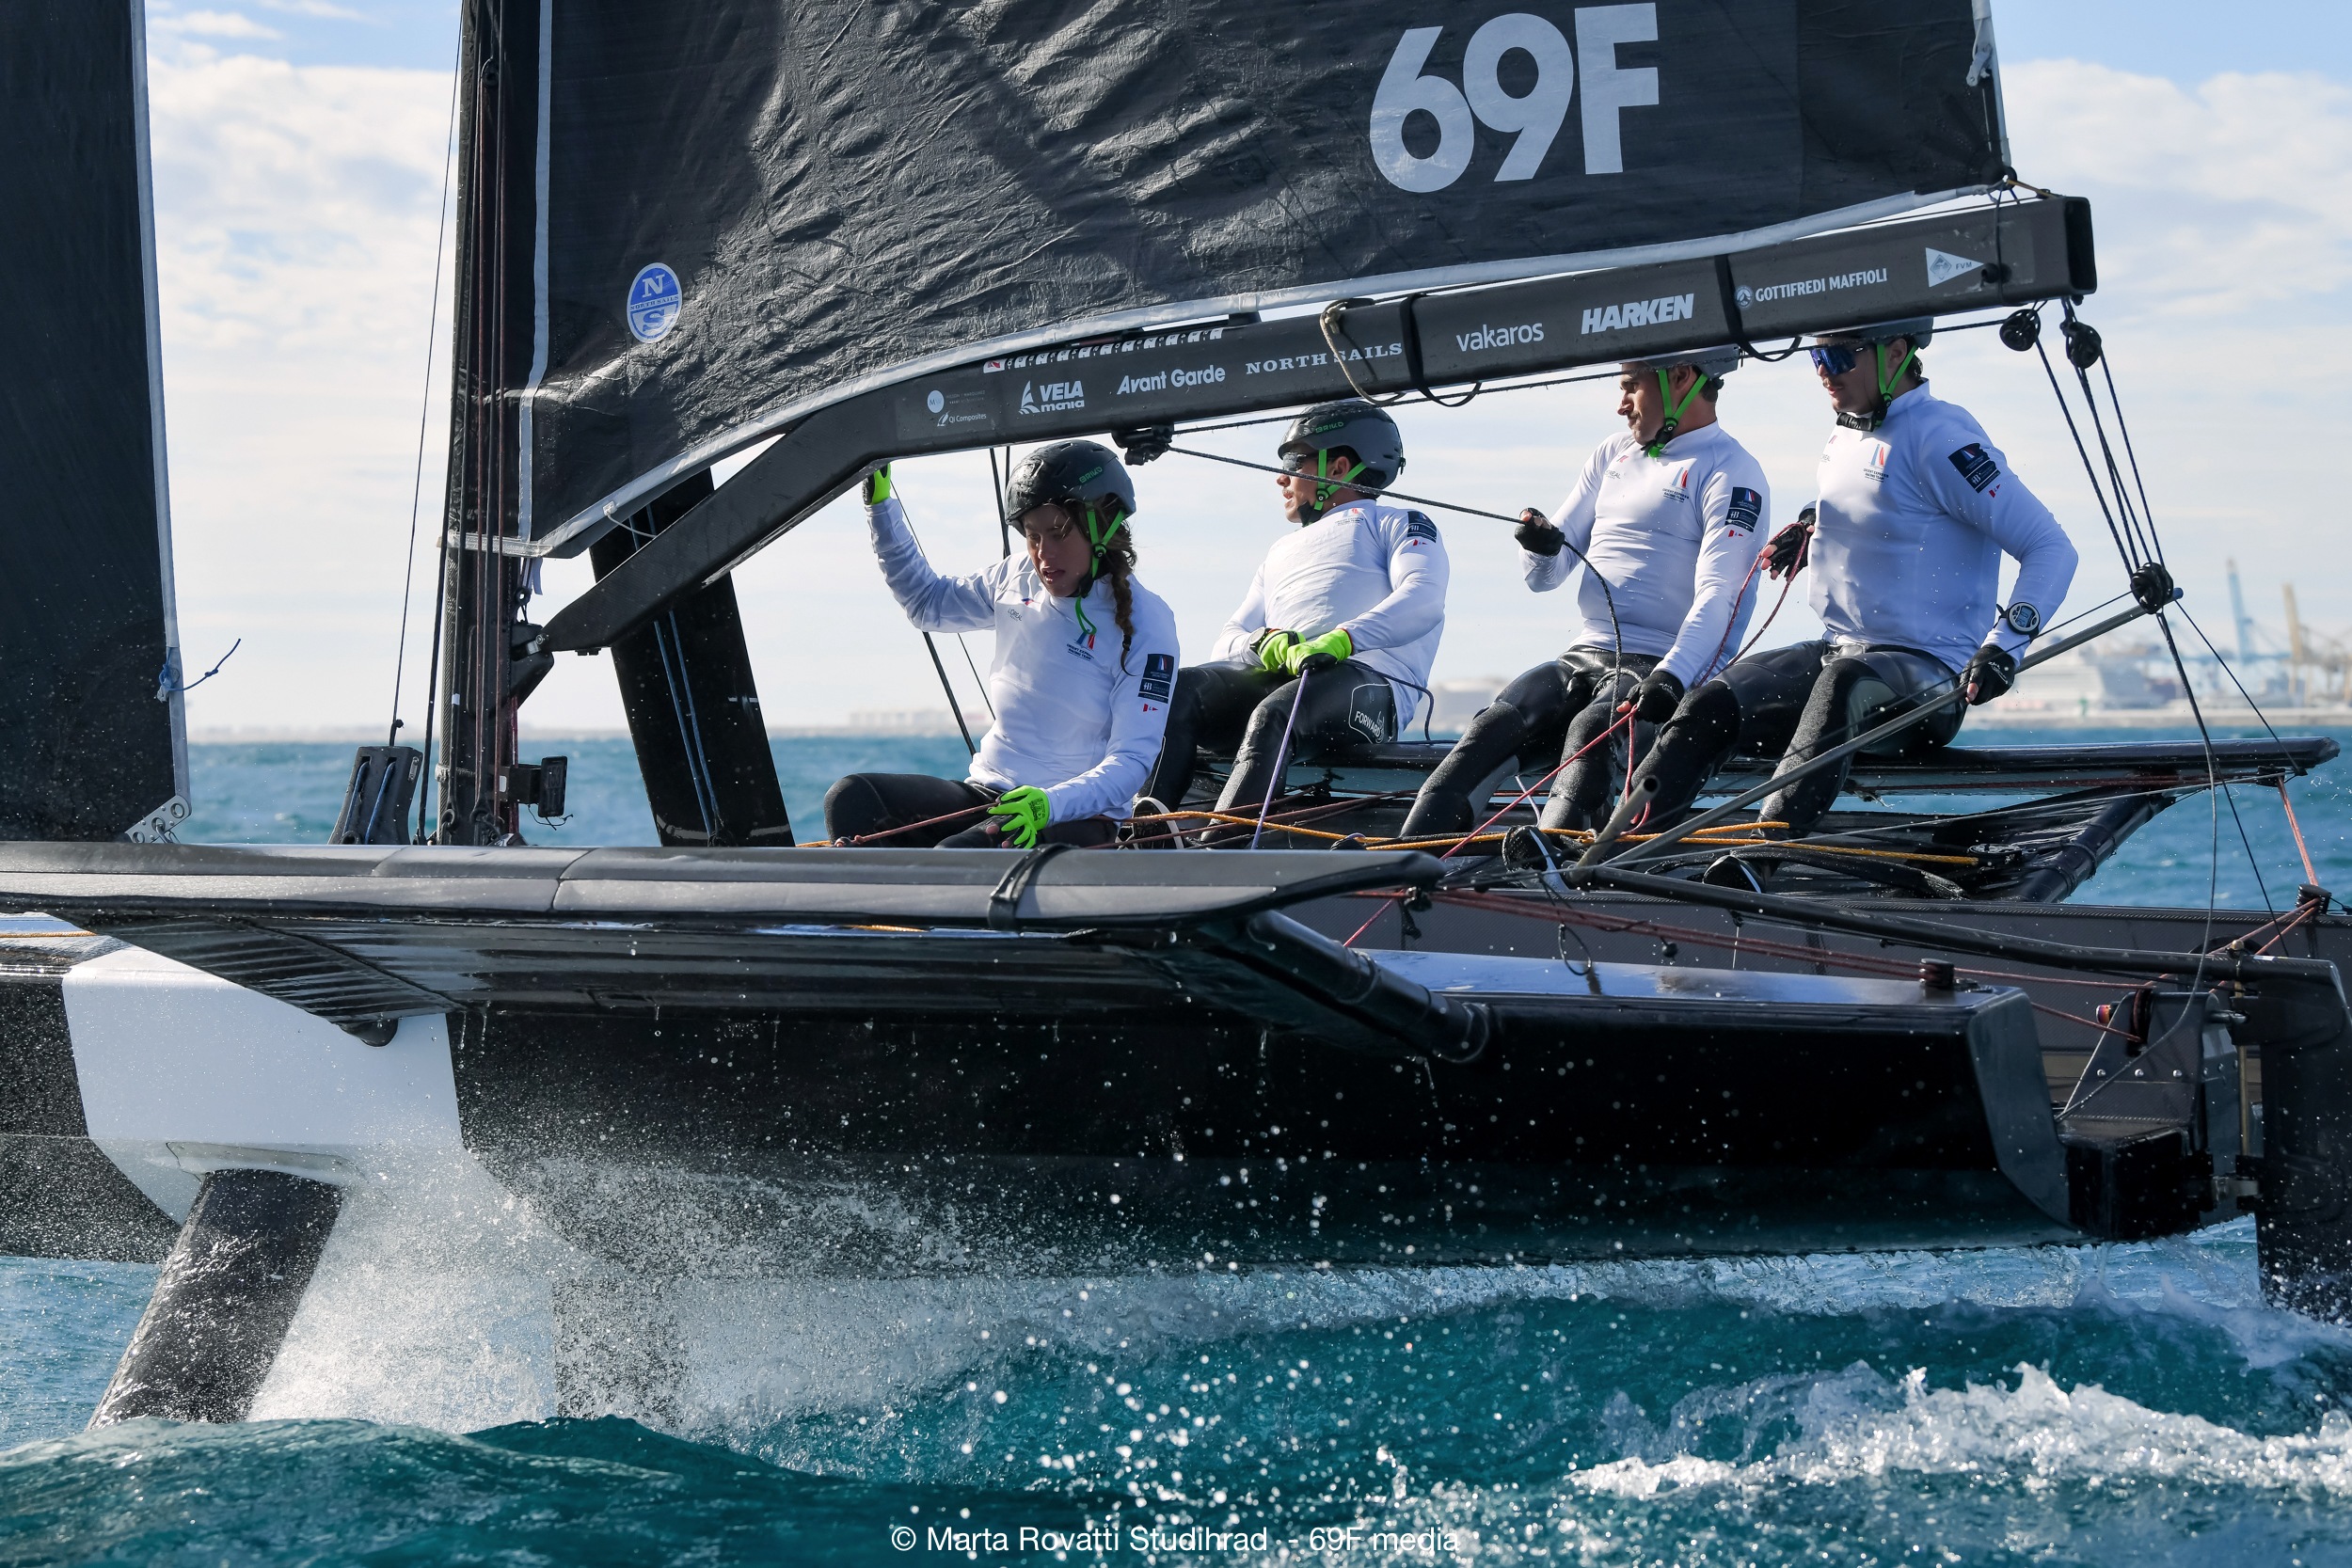 69F Youth Foiling Gold Cup Grand Final: a Barcellona vincono i francesi